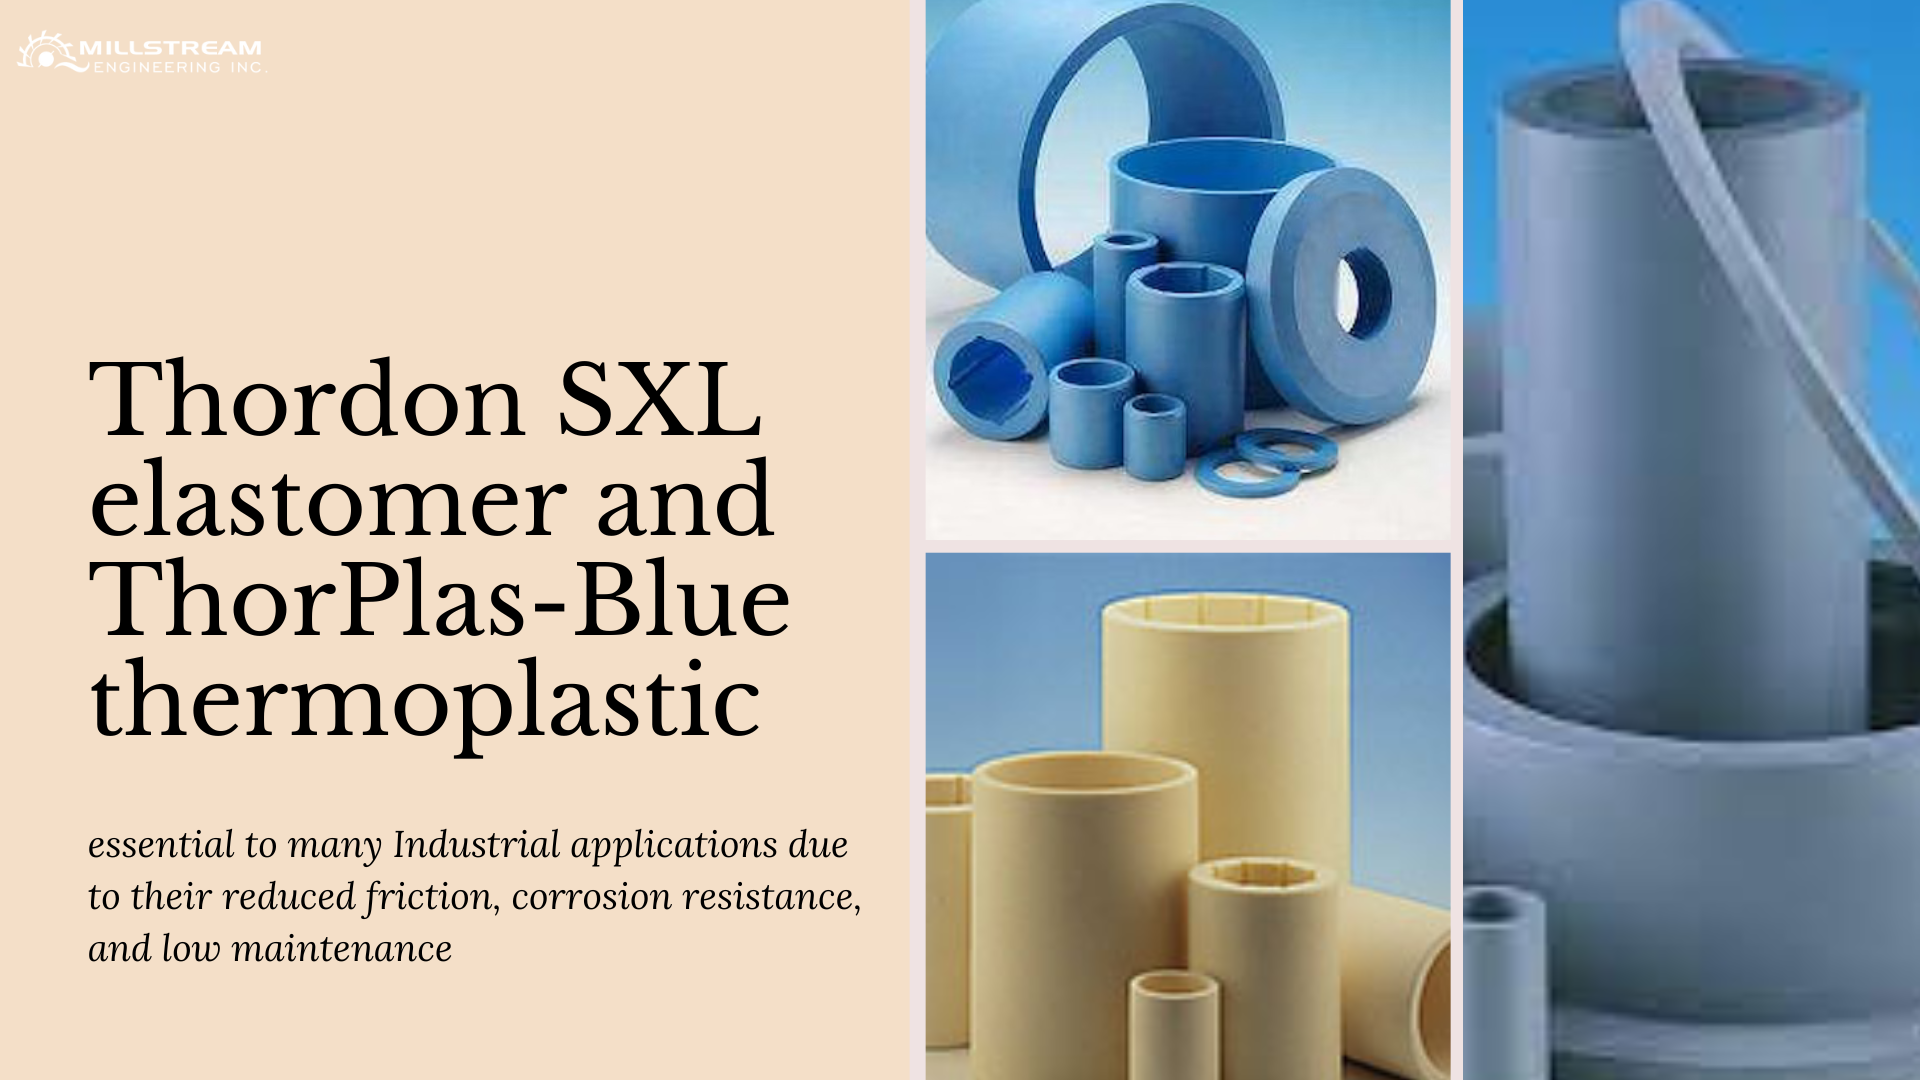 Thordon SXL elastomer, and ThorPlas-Blue thermoplastic are essential to many Industrial applications, due to their reduced friction